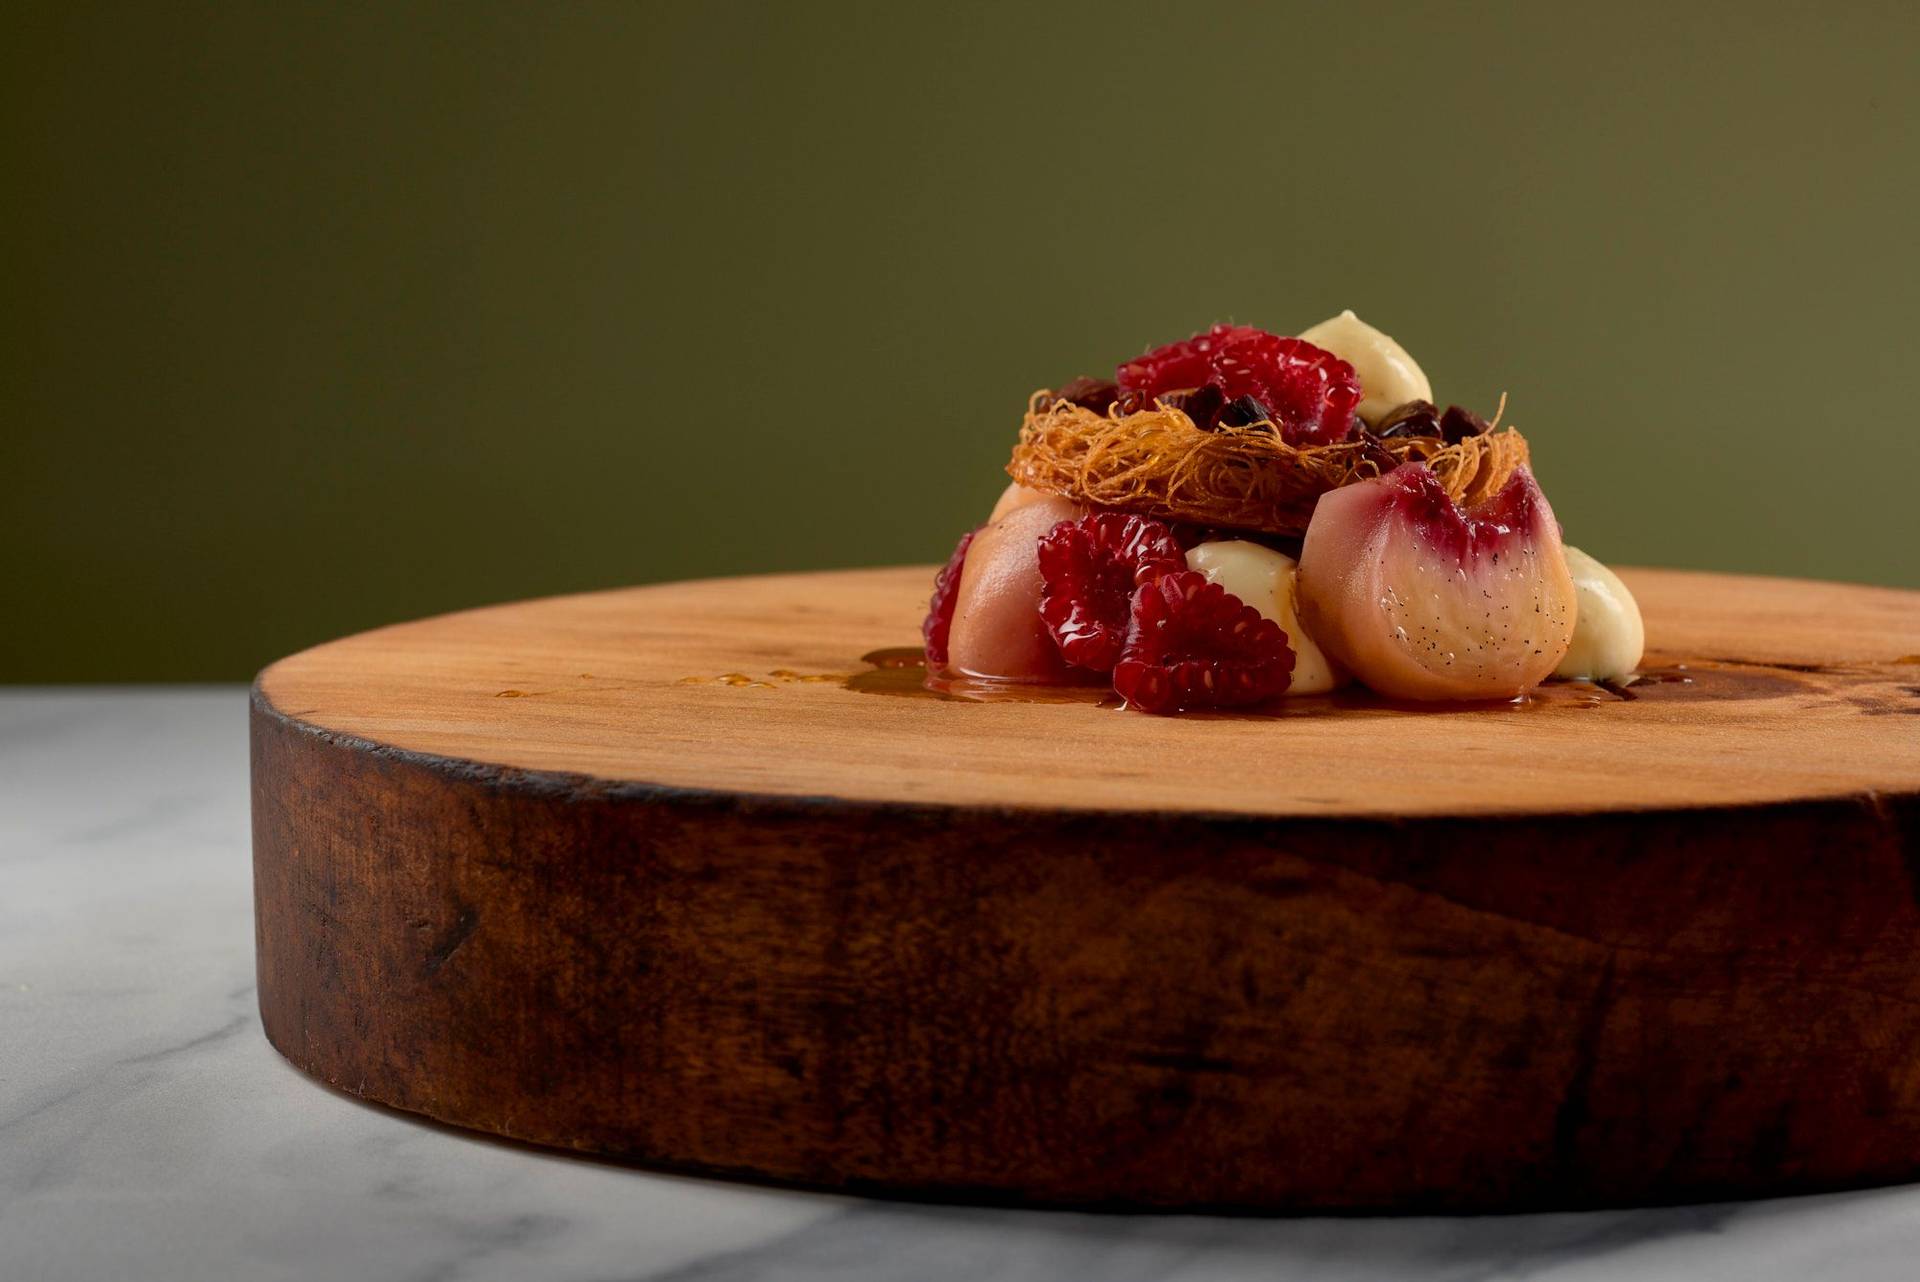 peach melba dessert on a wooden plate with a marbled sapienstone top and green background